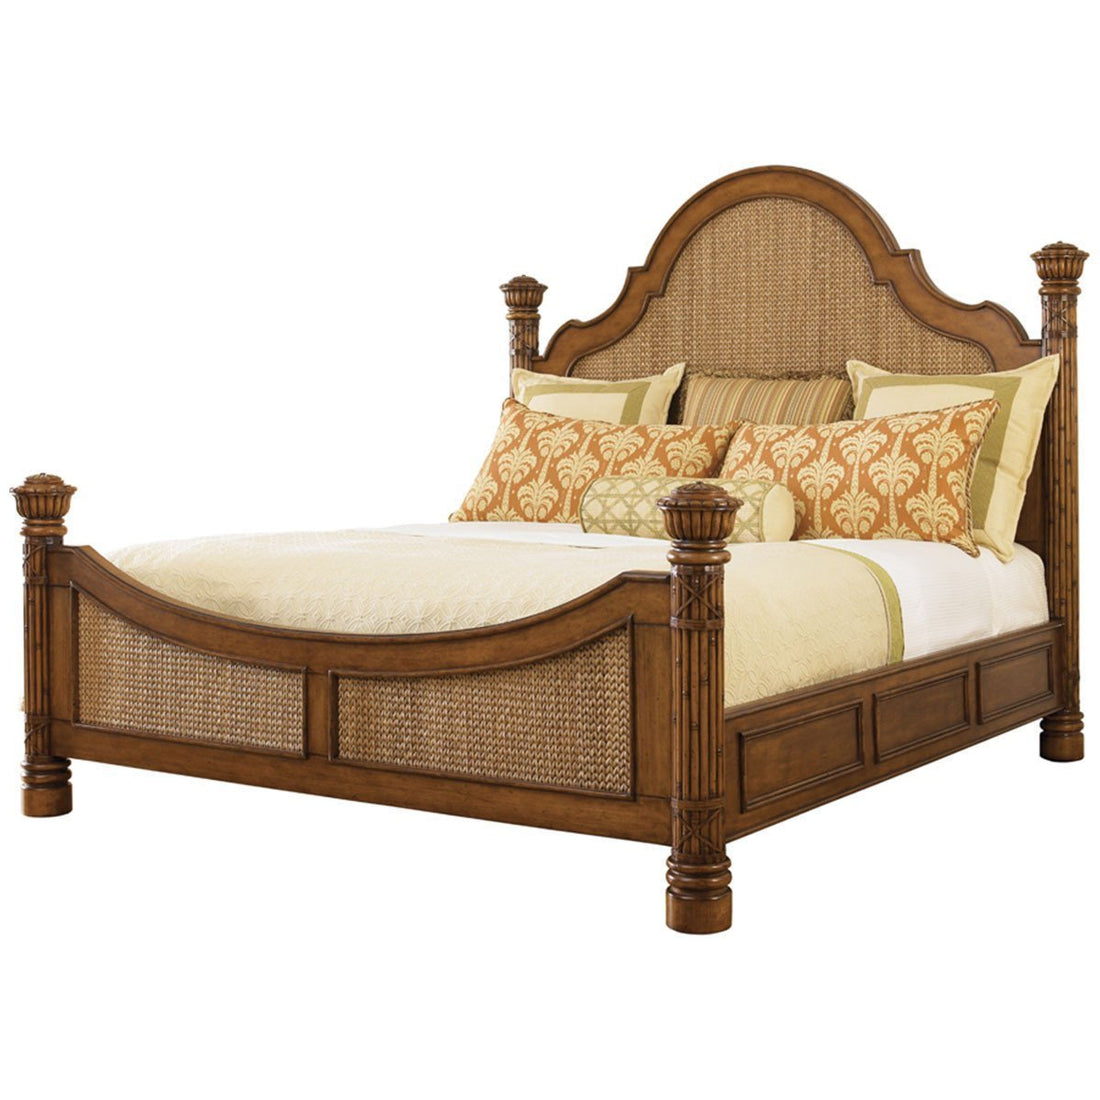 Tommy Bahama Island Estate Round Hill Bed 531-133C